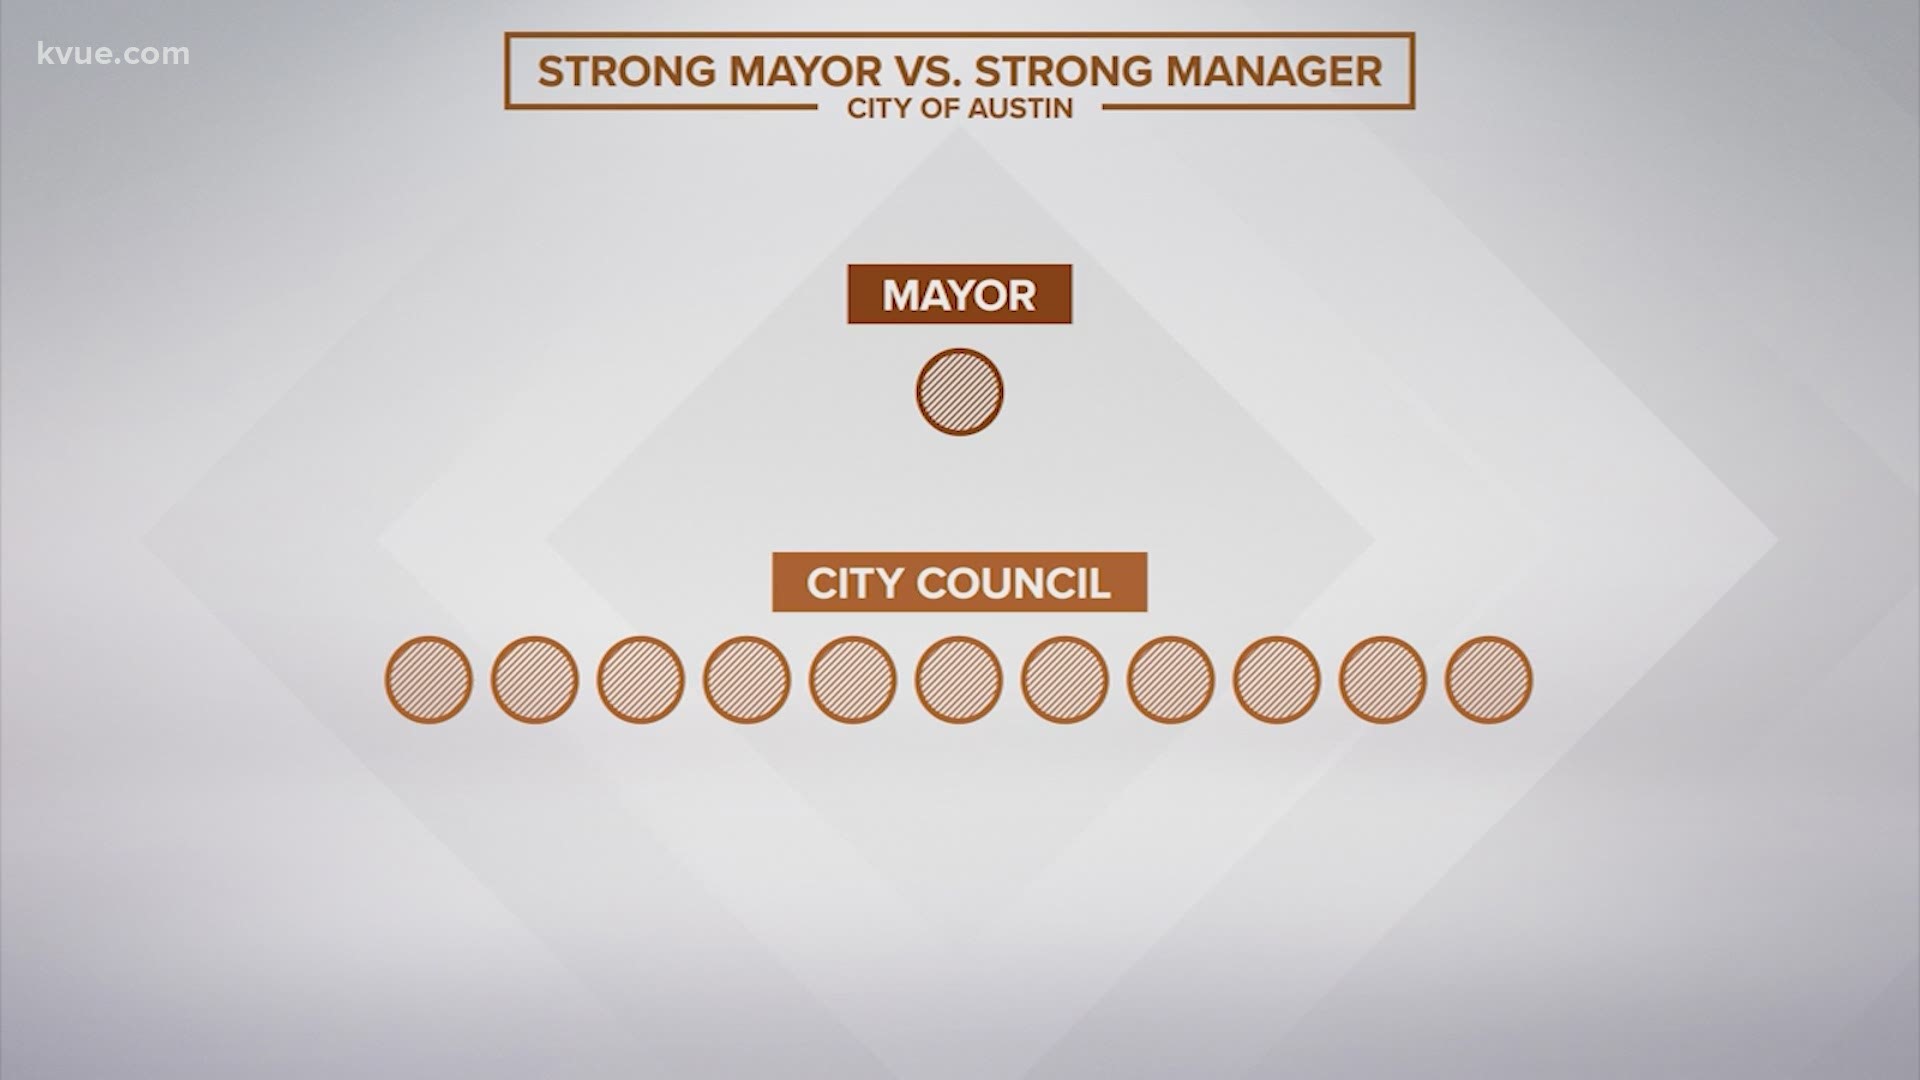 A local political group wants the mayor to have more control over how the City does business.